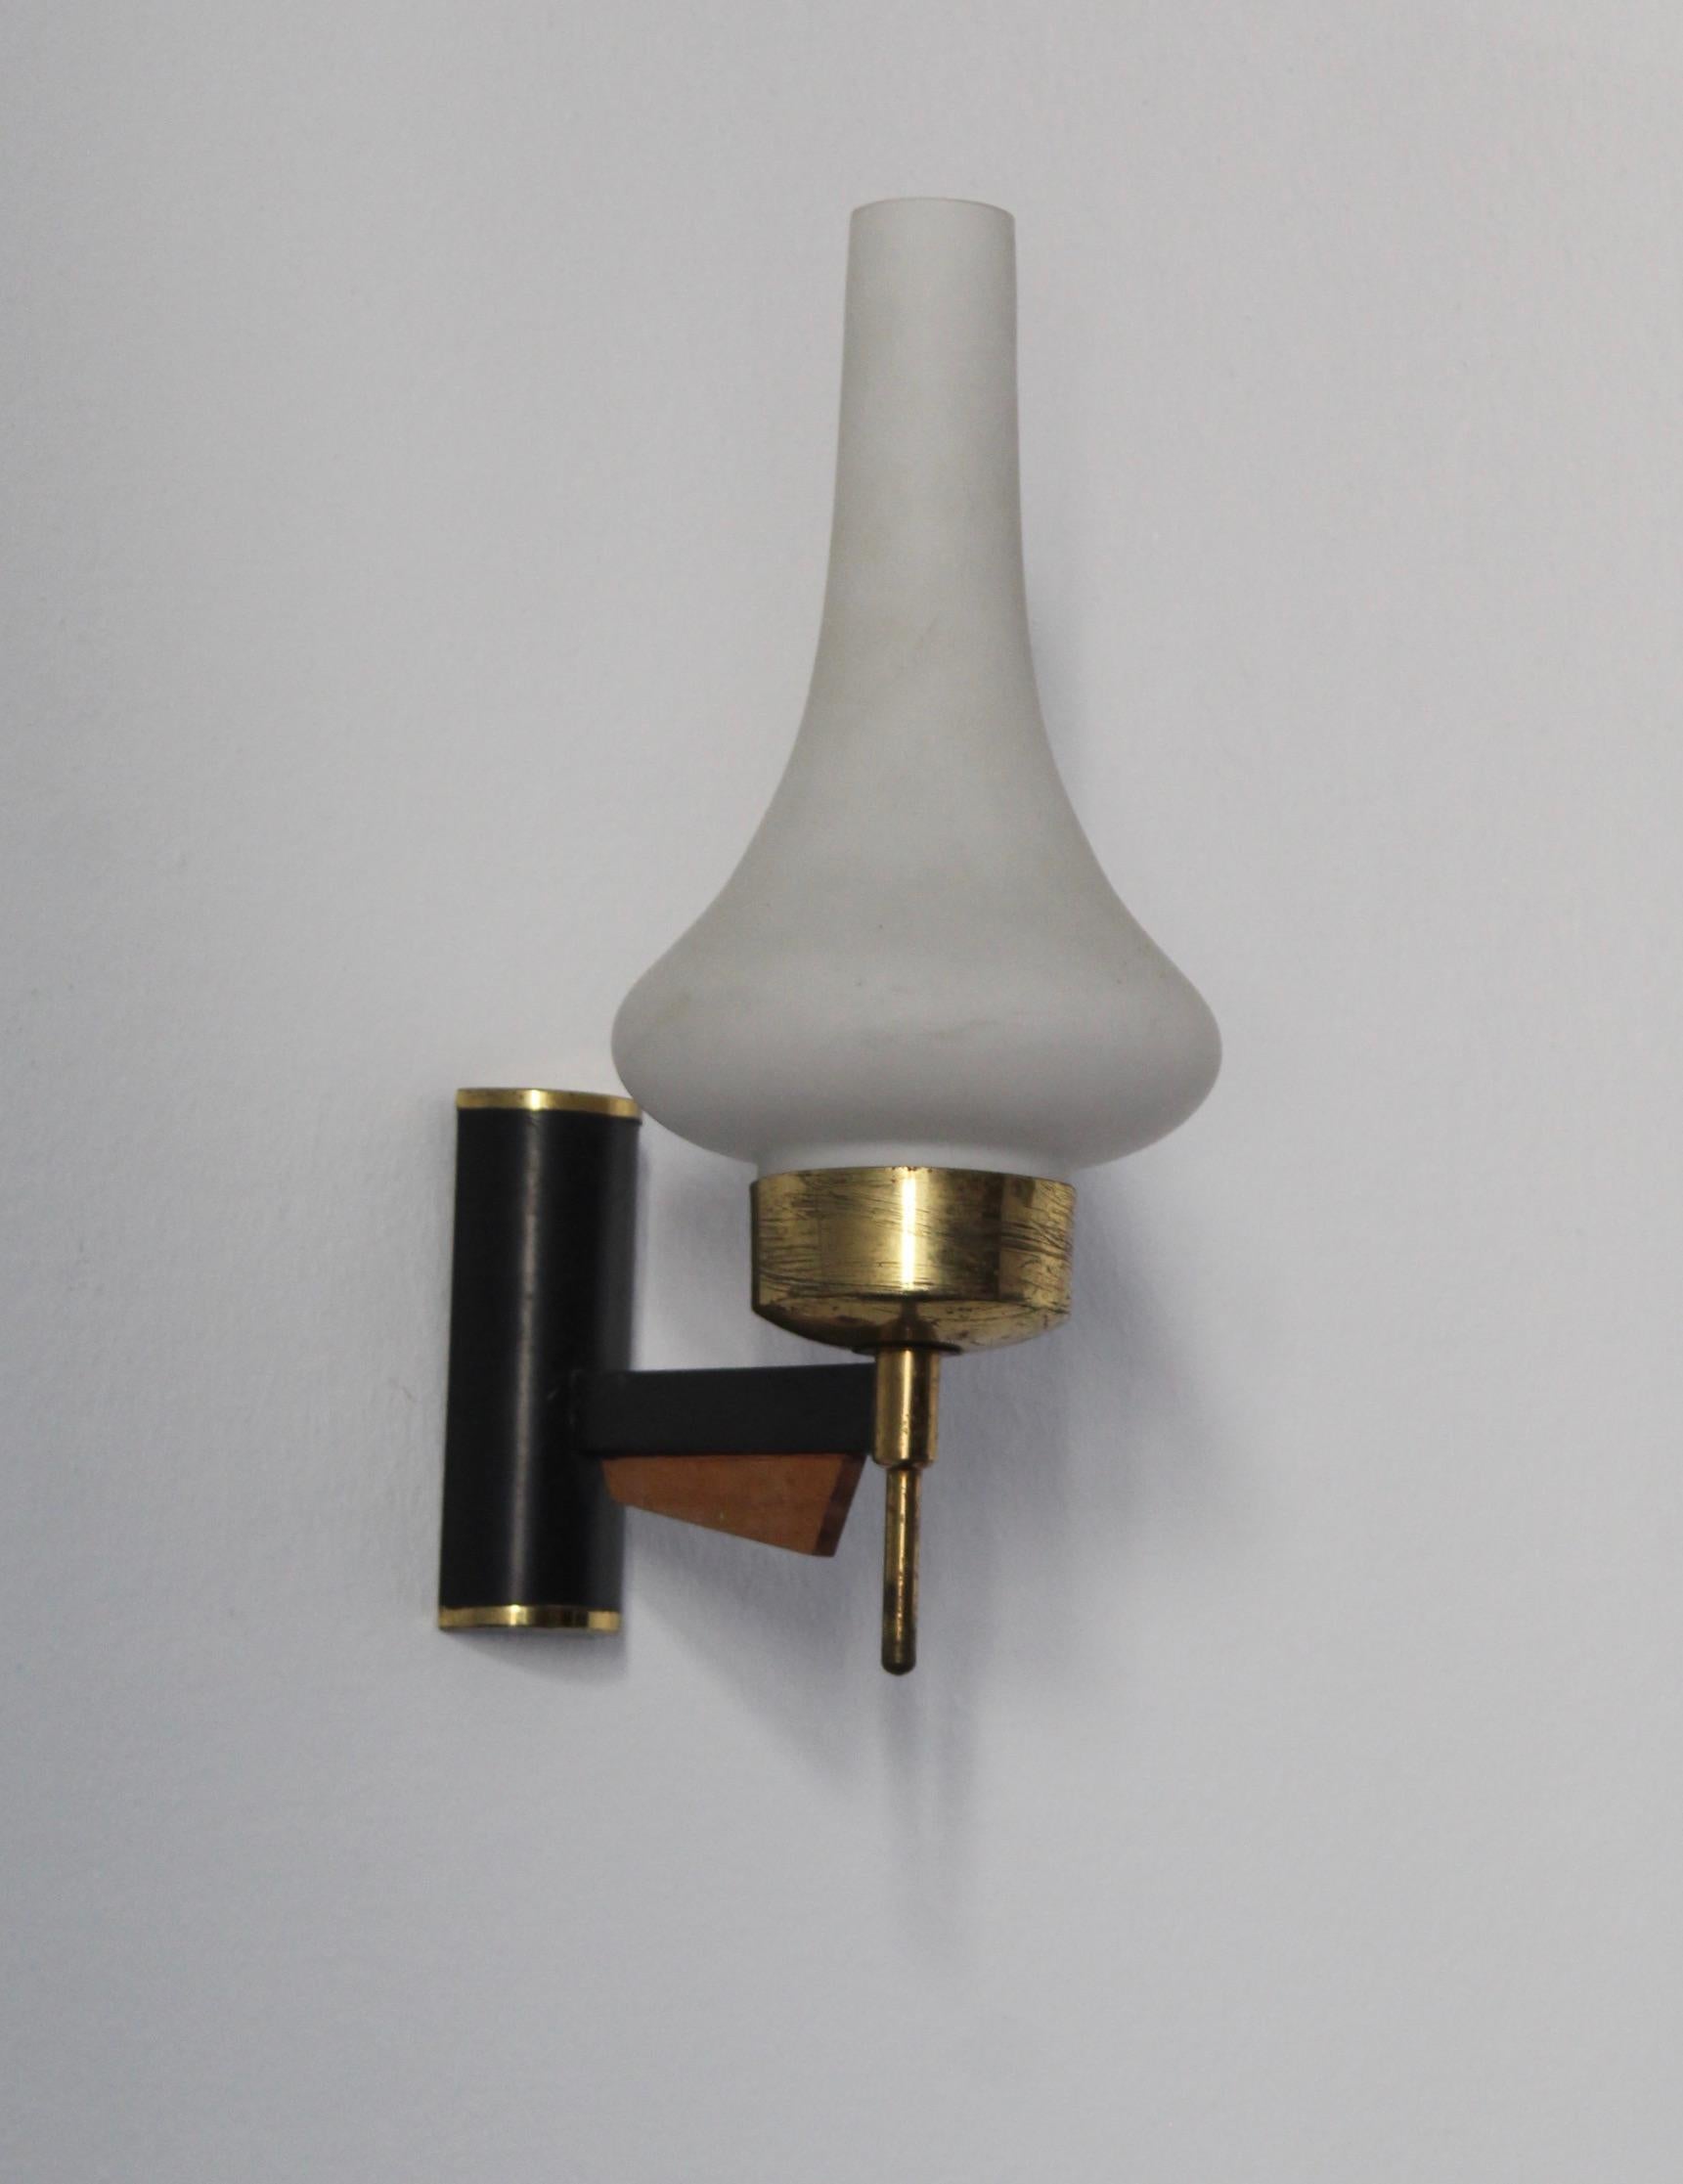 Italian, Wall Lights, Brass, Black Lacquer Metal, Teak, Milk Glass, Italy, 1950s In Good Condition For Sale In High Point, NC